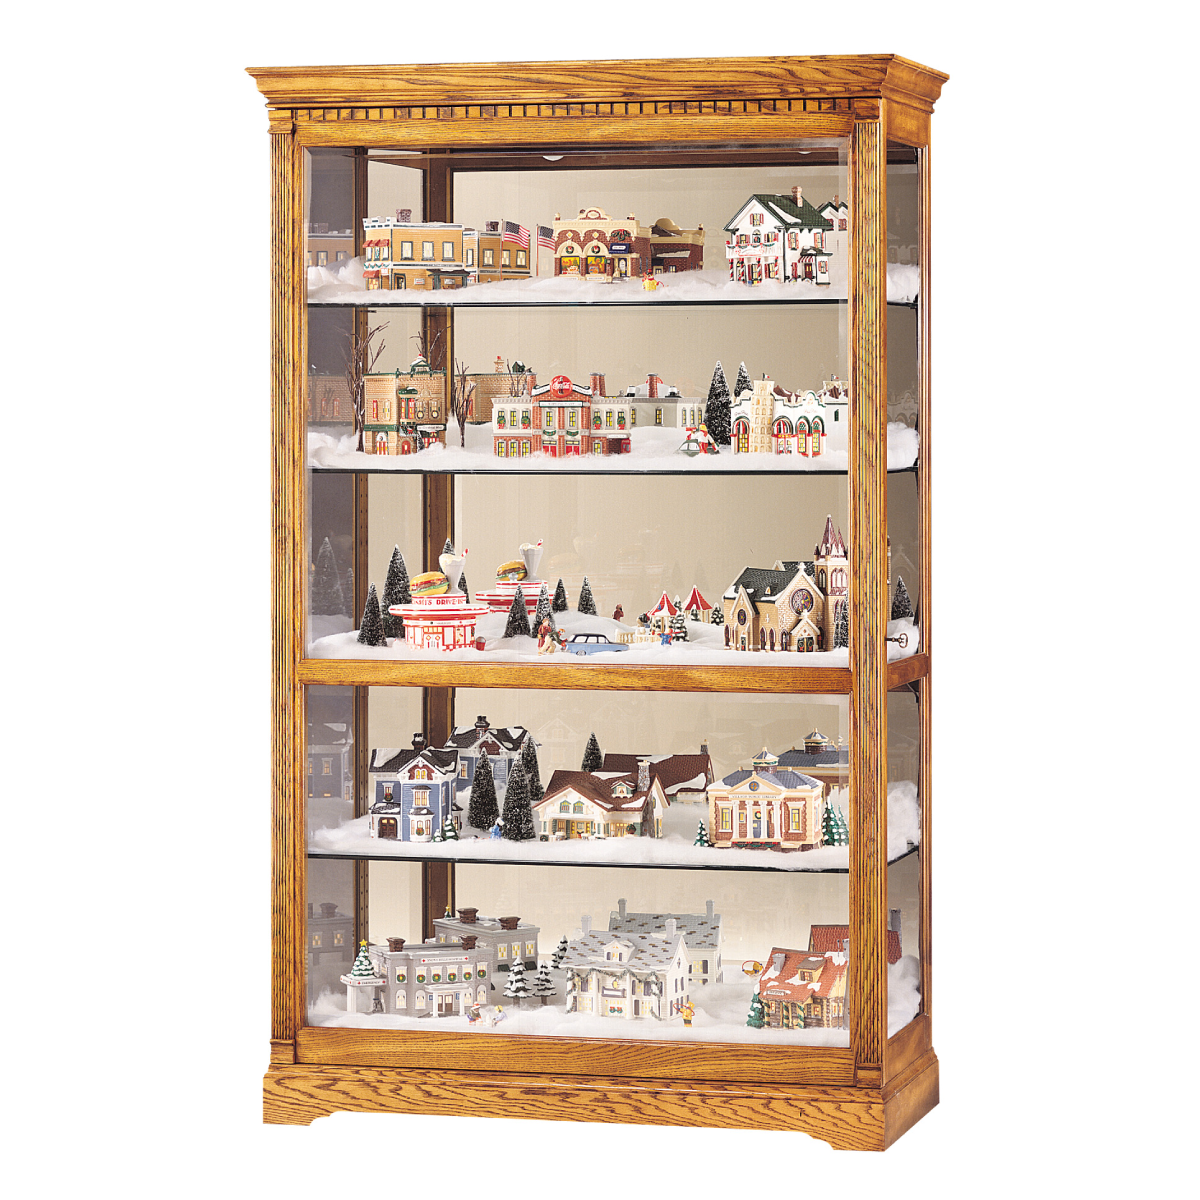 Howard Miller Parkview Curio Cabinet 680237 - Home Bars USA